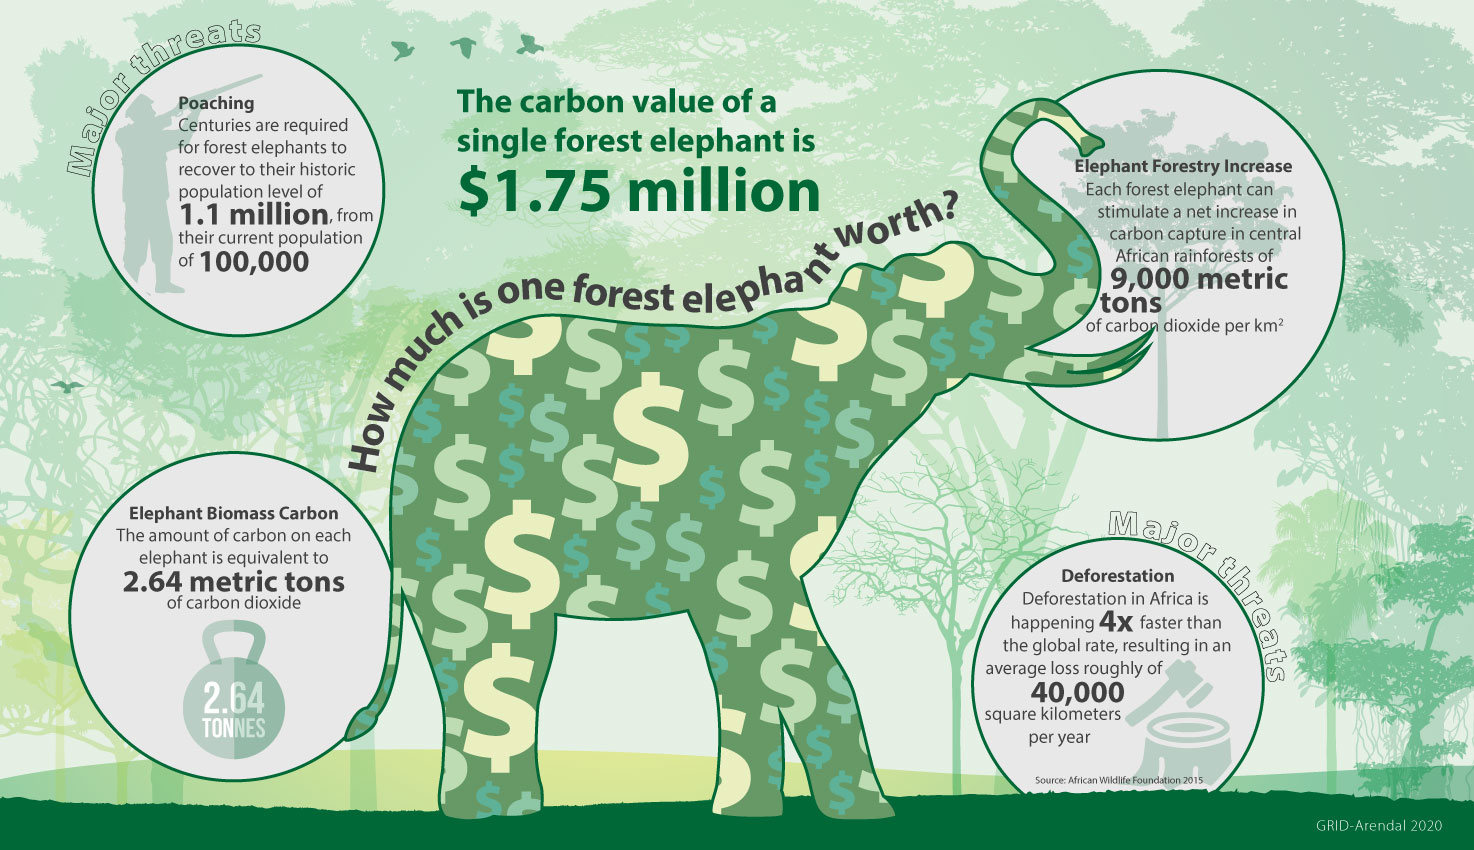 IMF: https://www.imf.org/en/Publications/fandd/issues/2020/09/how-african-elephants-fight-climate-change-ralph-chami - they say living elephant has a lot of value in the form of "ecosystem services" but there is not a single unified metric.